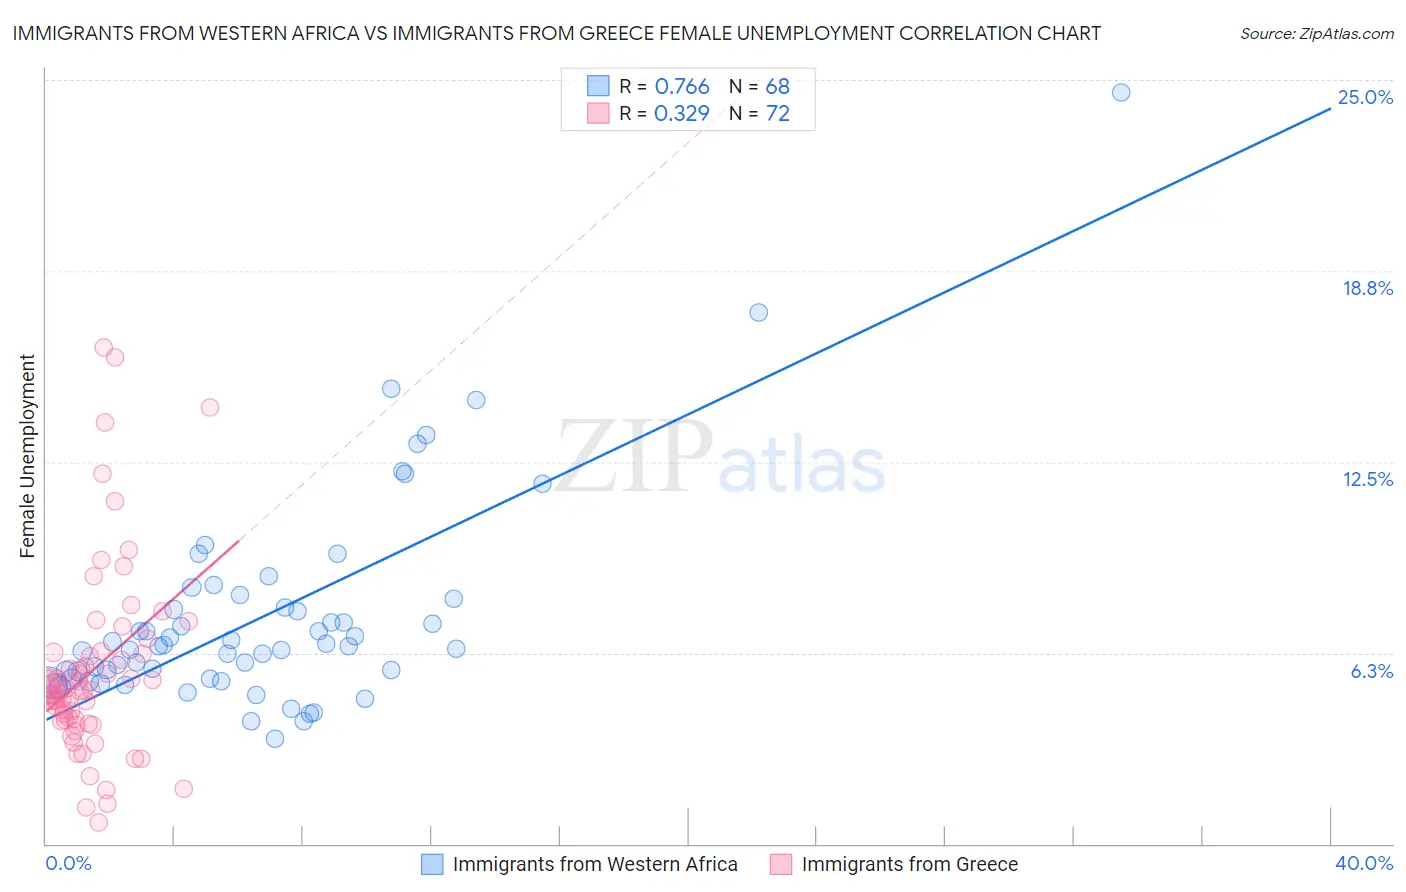 Immigrants from Western Africa vs Immigrants from Greece Female Unemployment